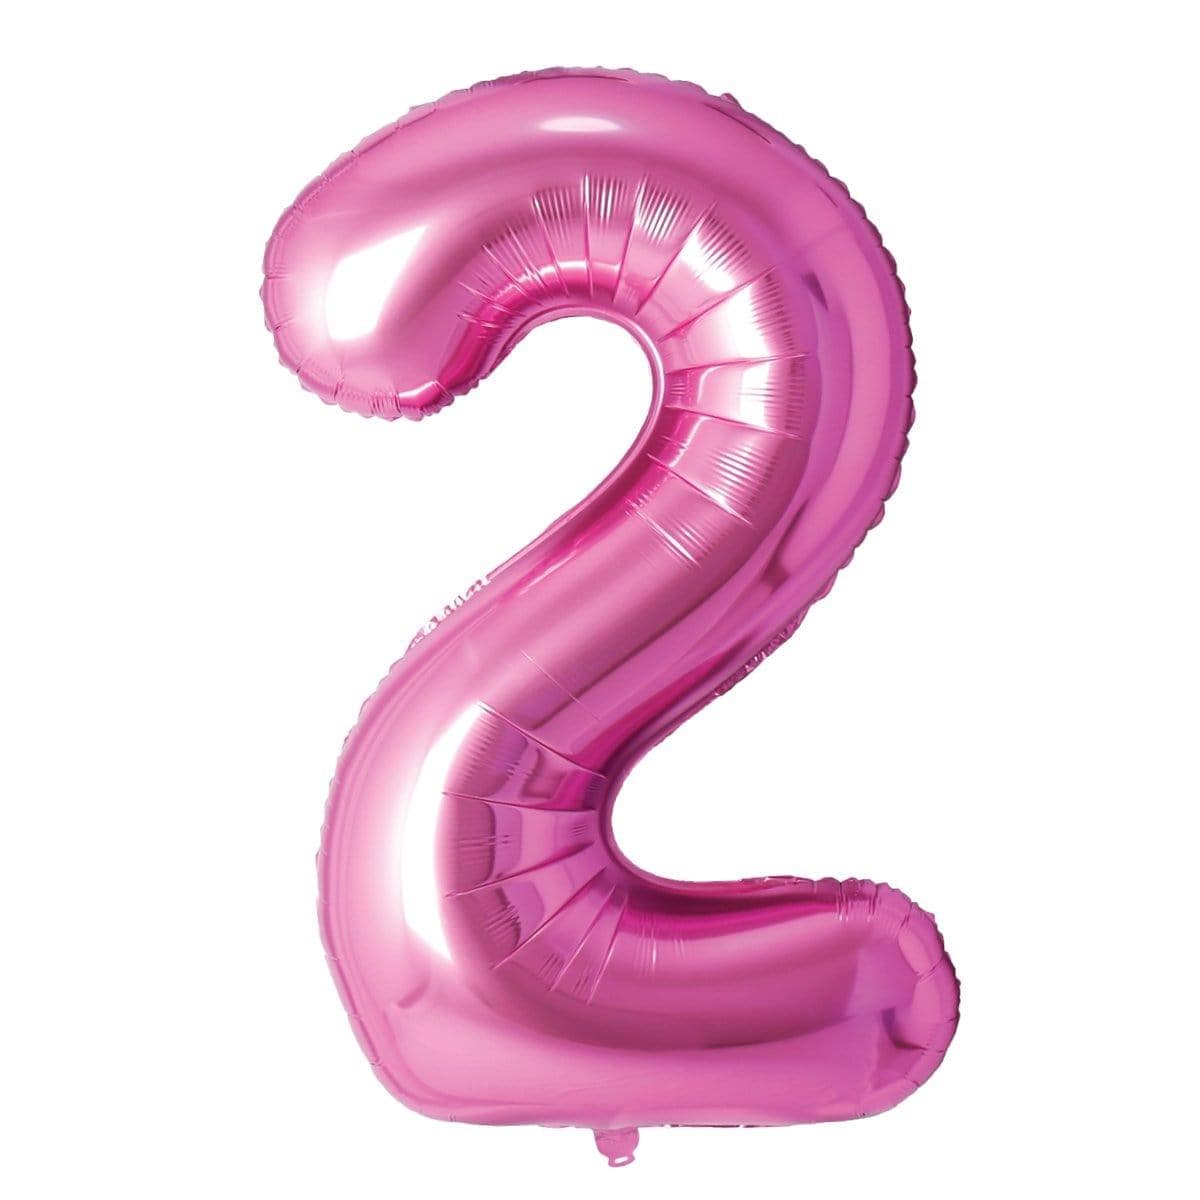 Buy Balloons Pink Number 2 Foil Balloon, 34 Inches sold at Party Expert